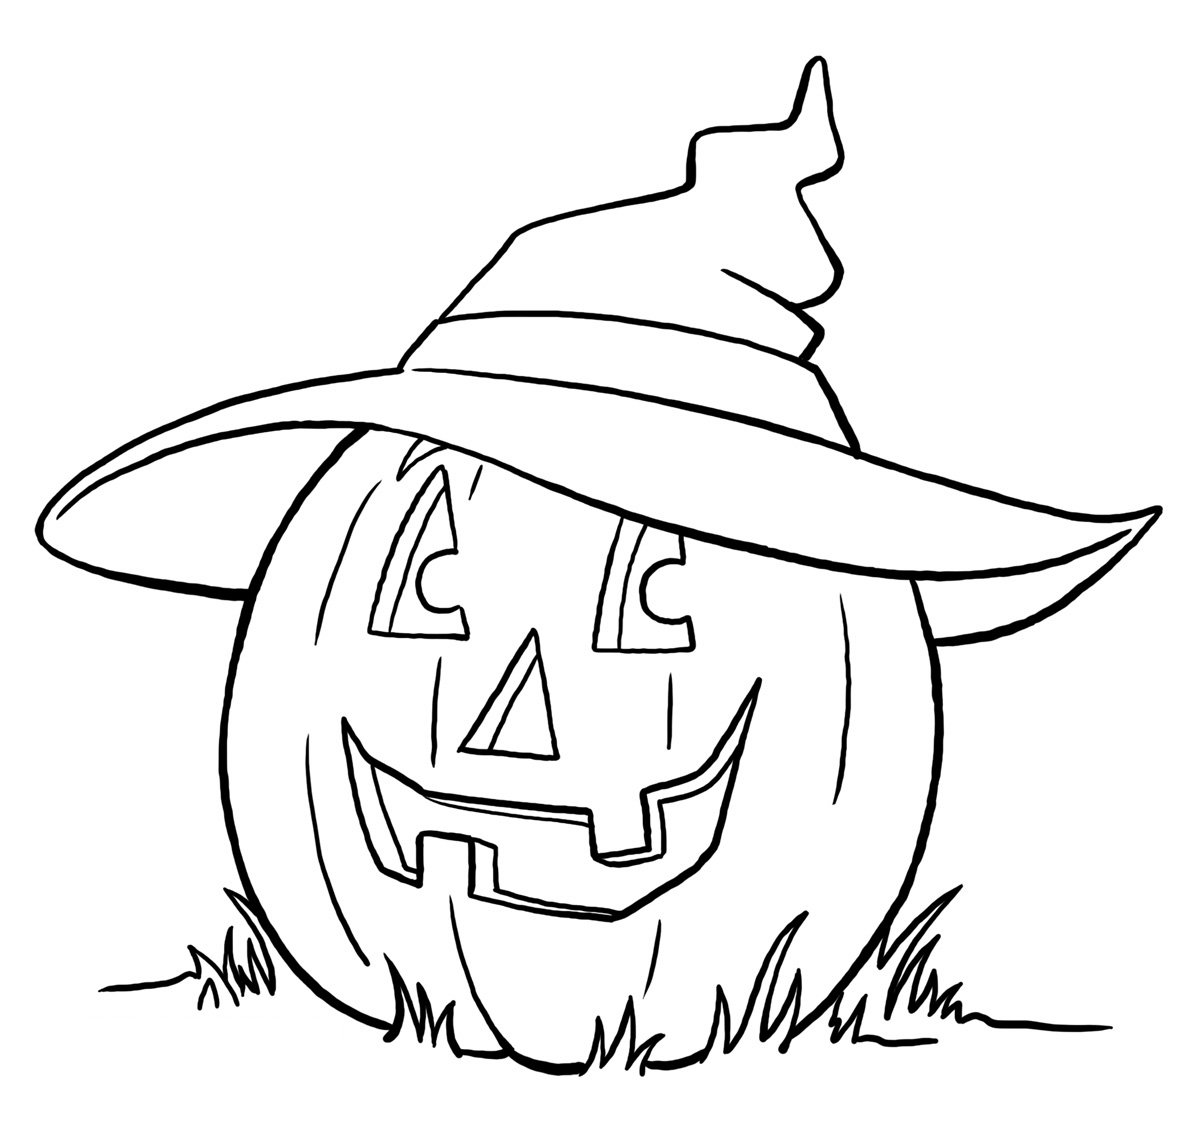 Coloring page: Pumpkin (Objects) #166865 - Free Printable Coloring Pages